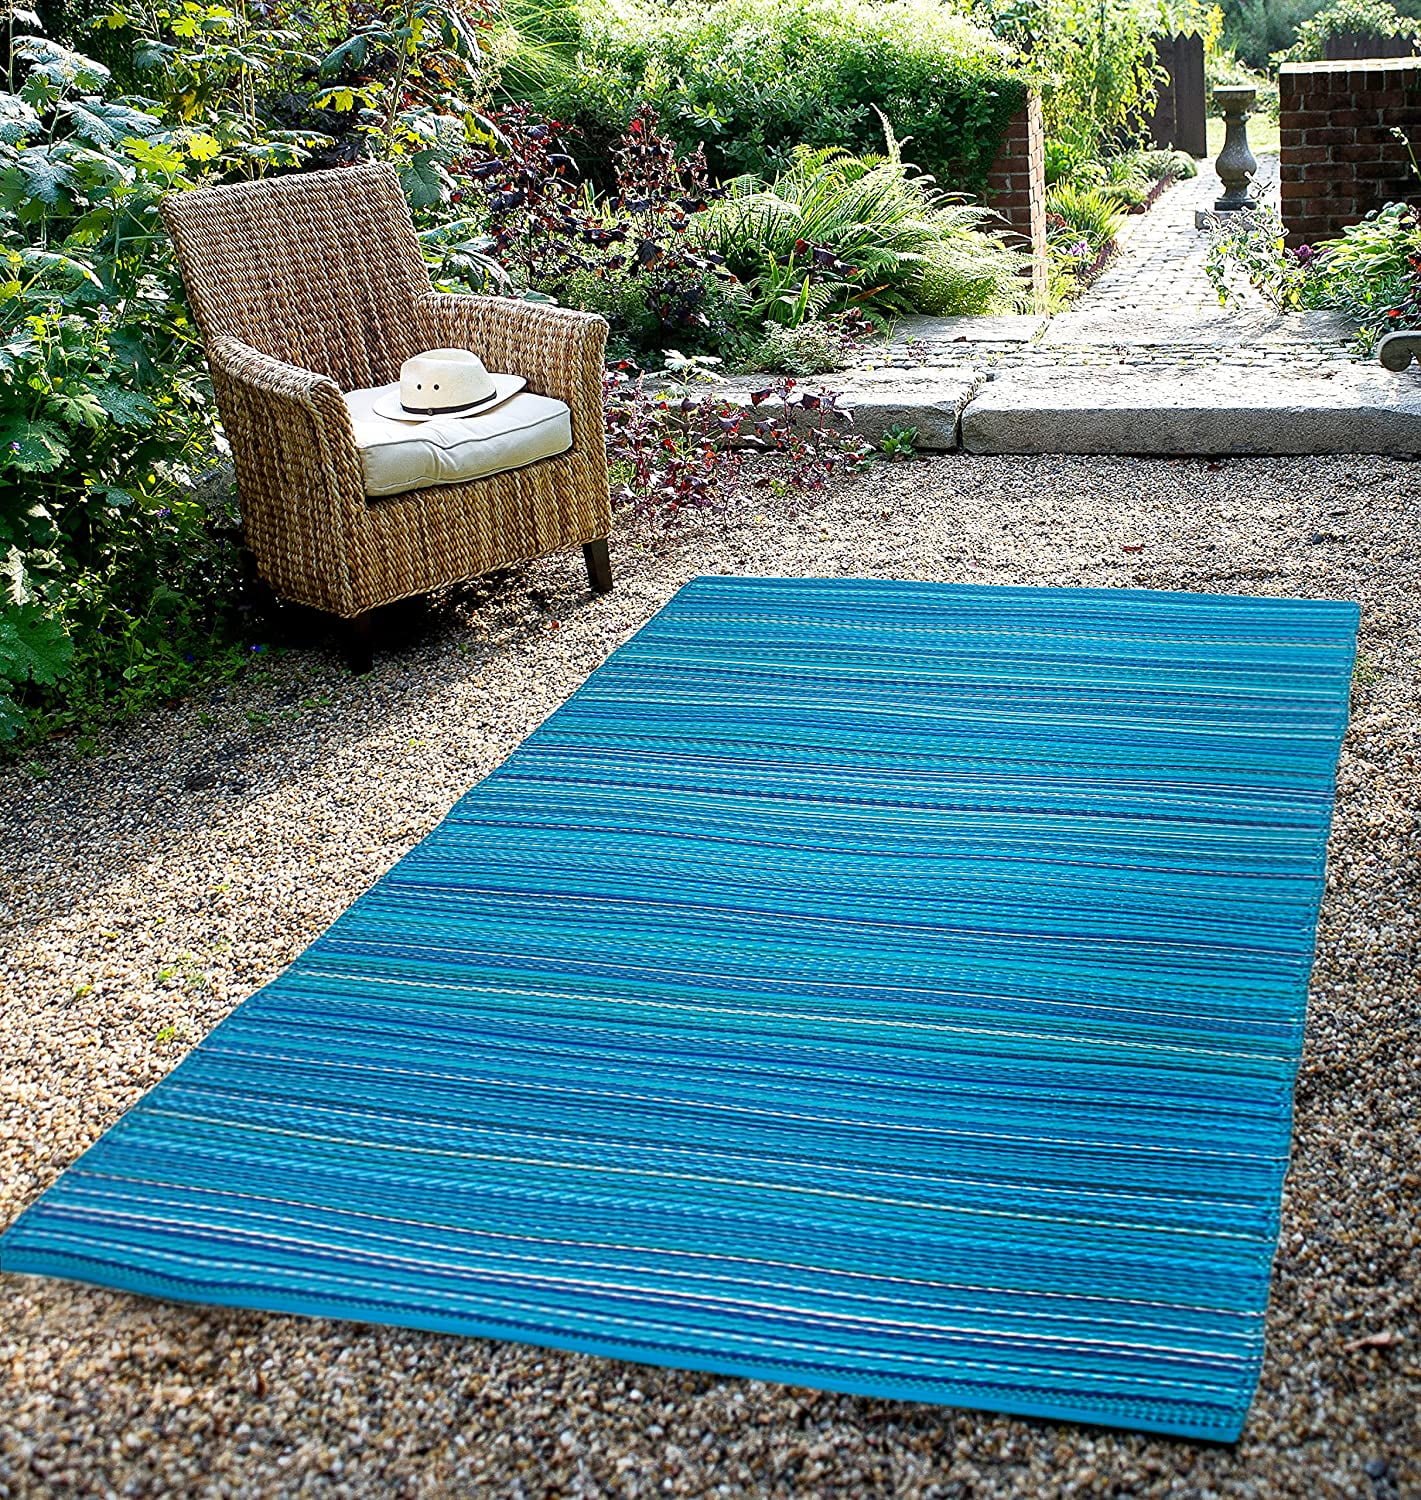 FH Home Outdoor Rug - Waterproof, Fade Resistant, Crease-Free - Premium  Recycled Plastic - Striped - Patio, Deck, Porch, Balcony - Havana -  Turquoise - 5 x 8 ft 